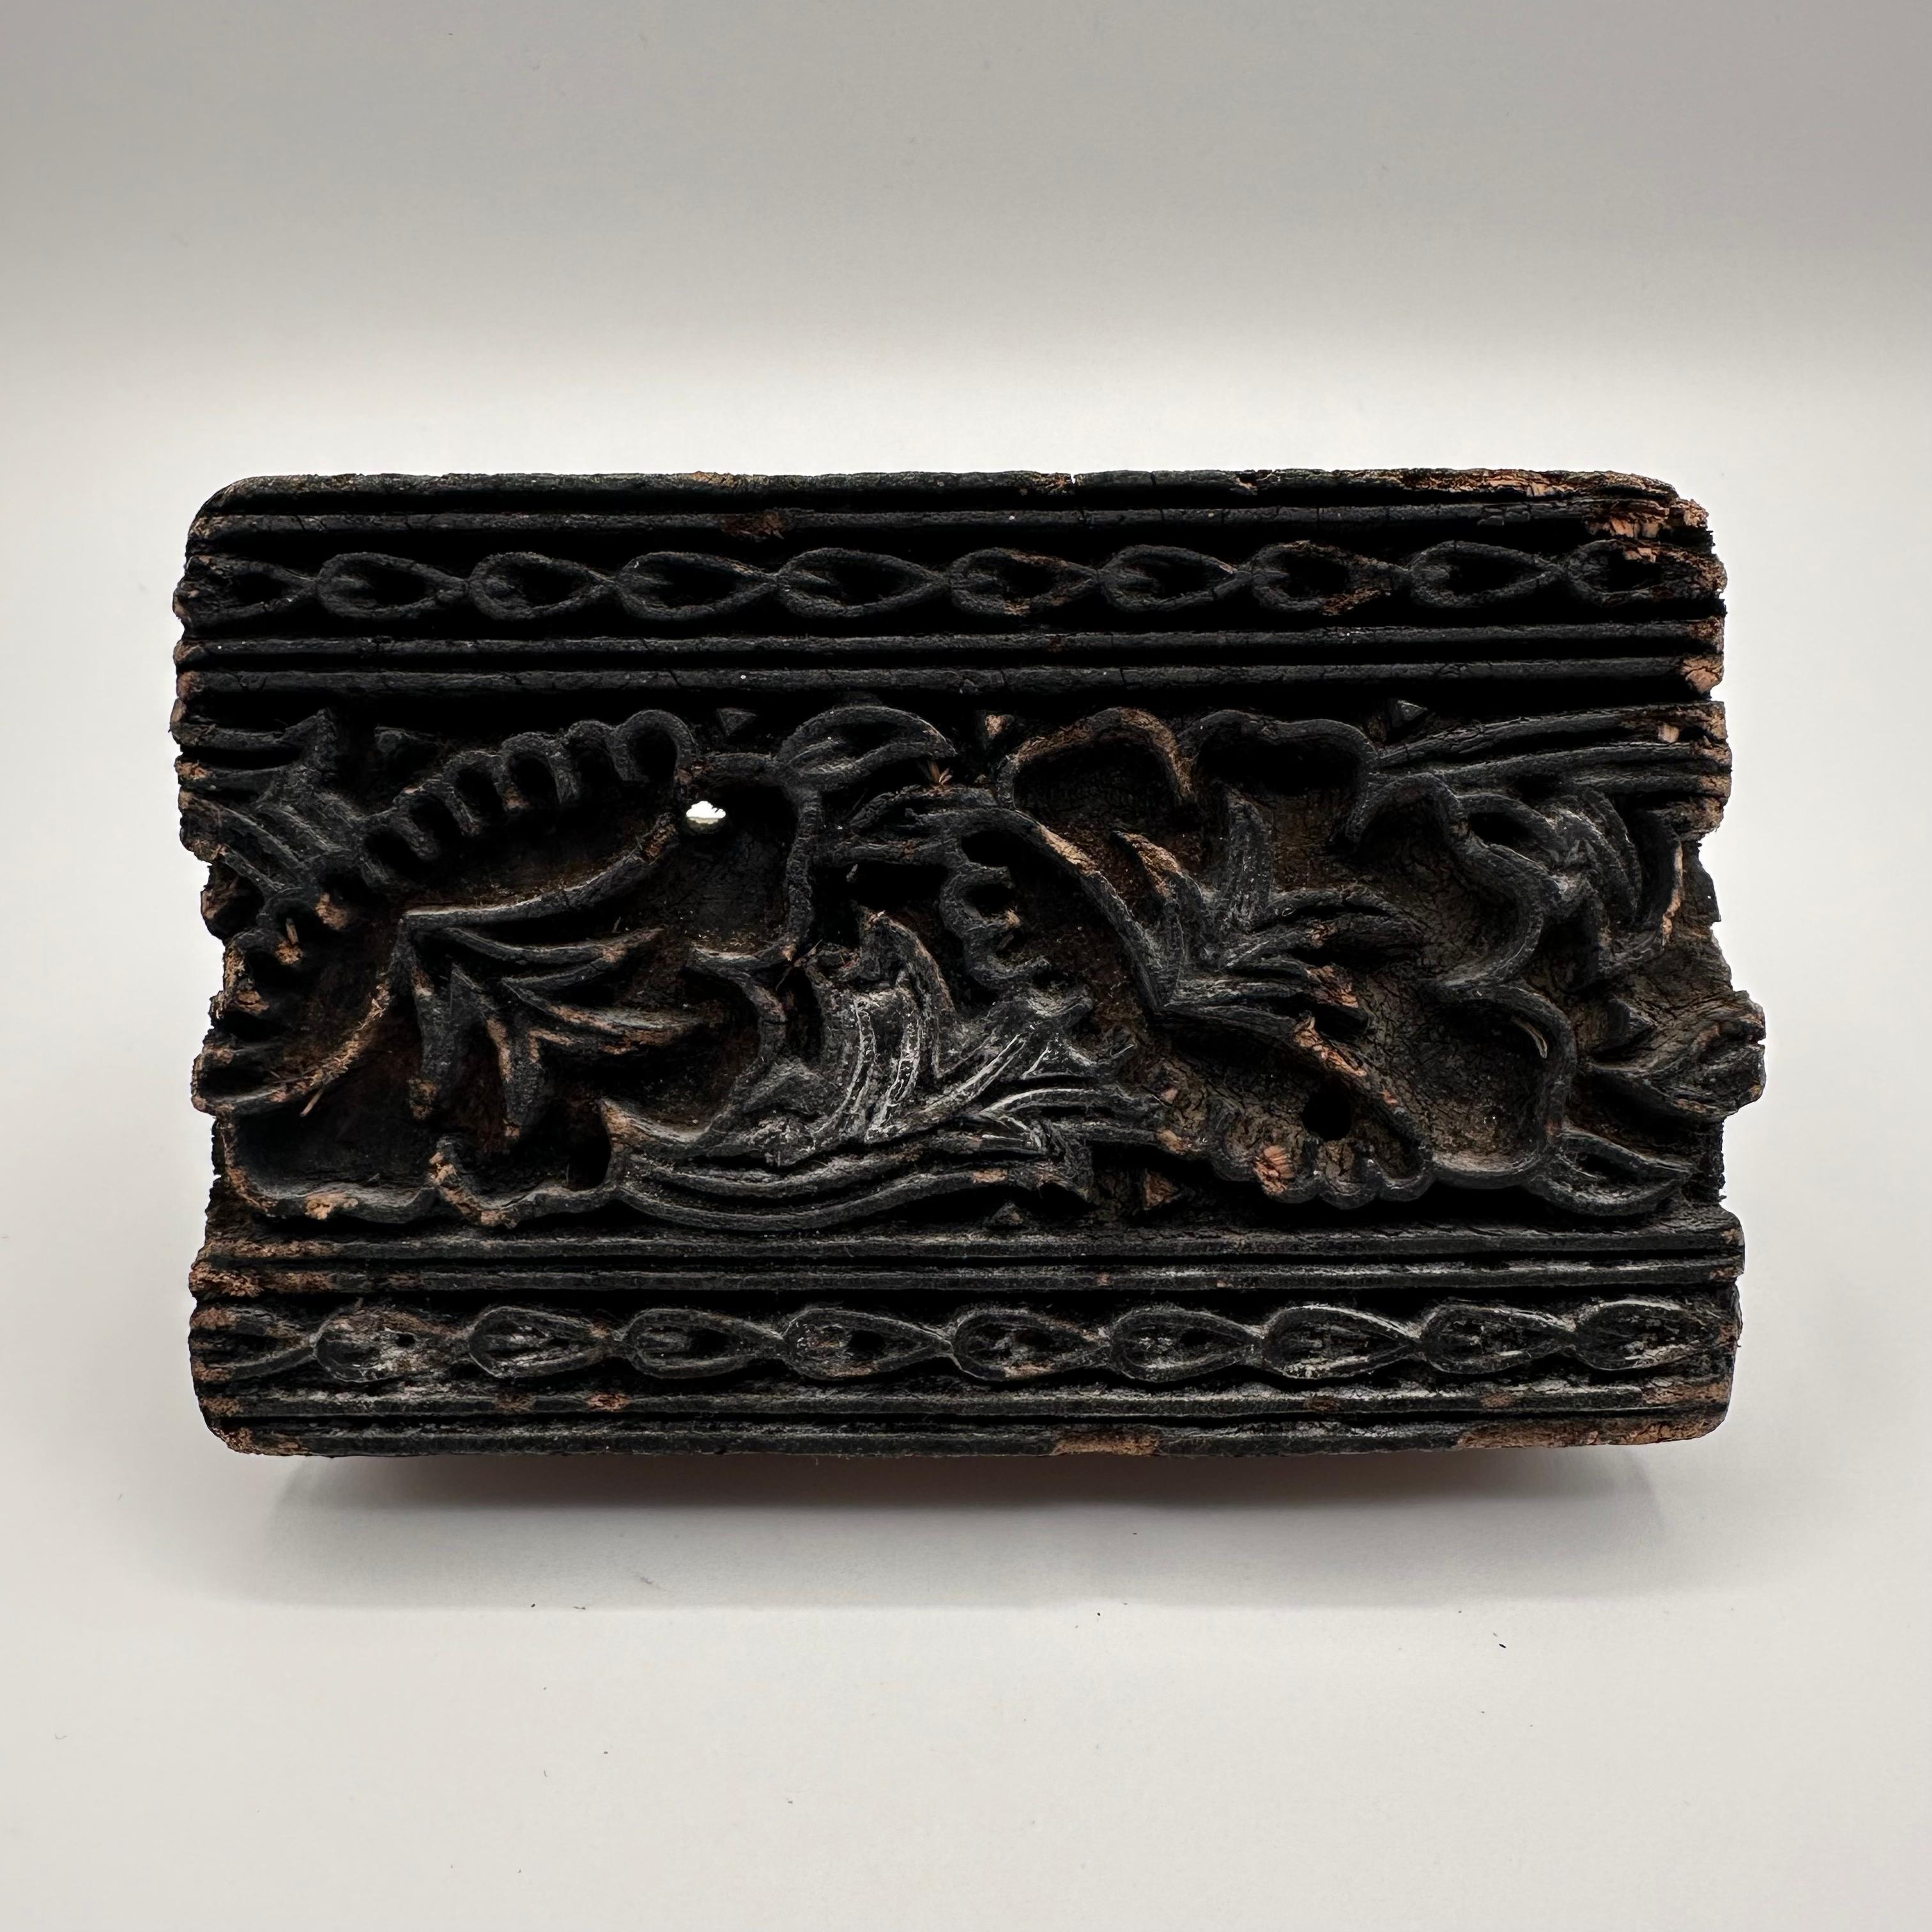 Amazing antique expertly hand-carved wood block that has been used in printing production. Stained dark black with ink, this now rustic piece shows signs of years of handling, while still being stunningly beautiful as a textural, sculptural object.